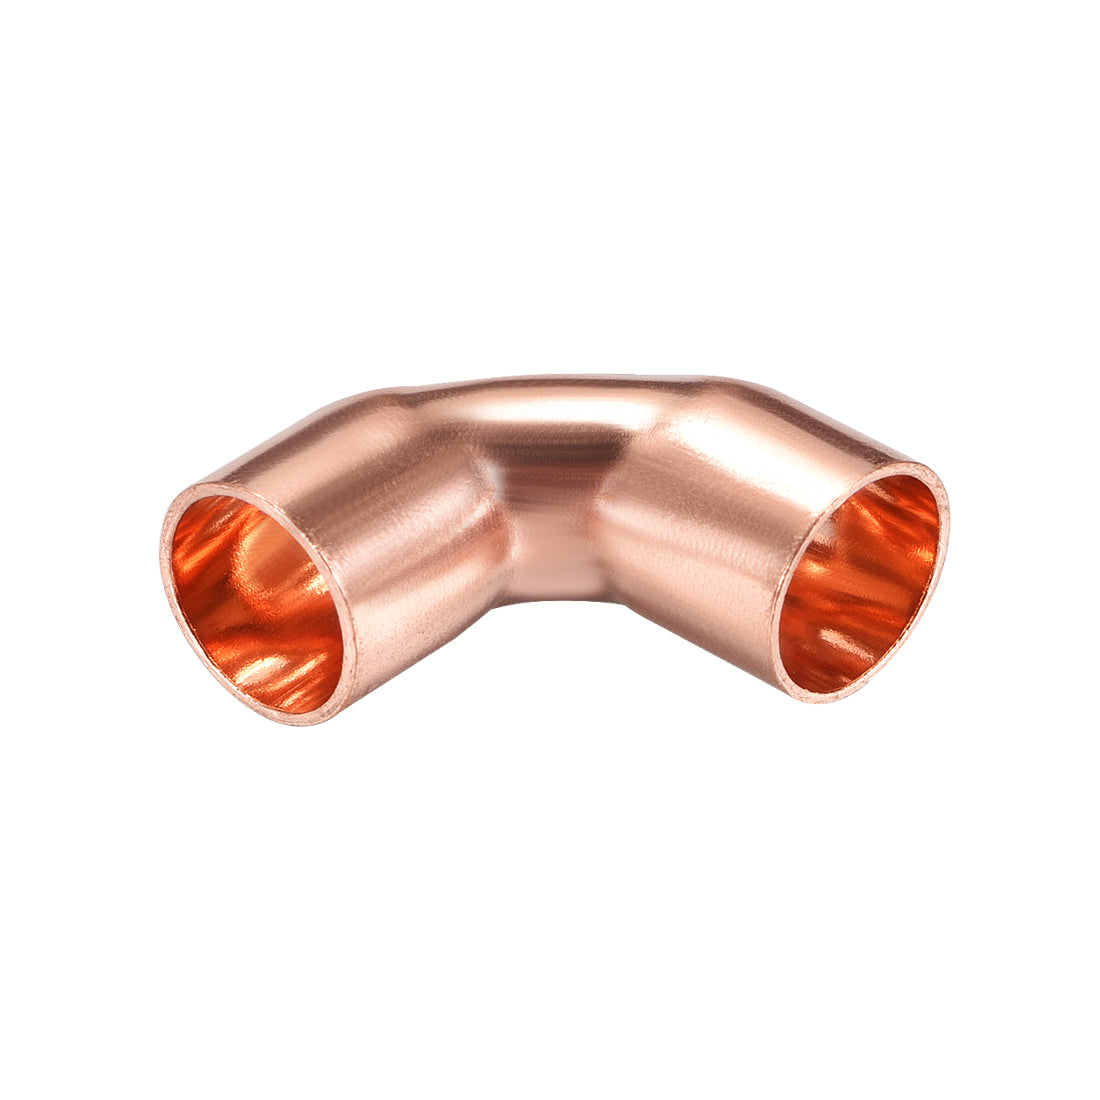 uxcell Uxcell 9.53mm ID 90 Degree Copper Elbow Pipe Fitting Connector 5pcs